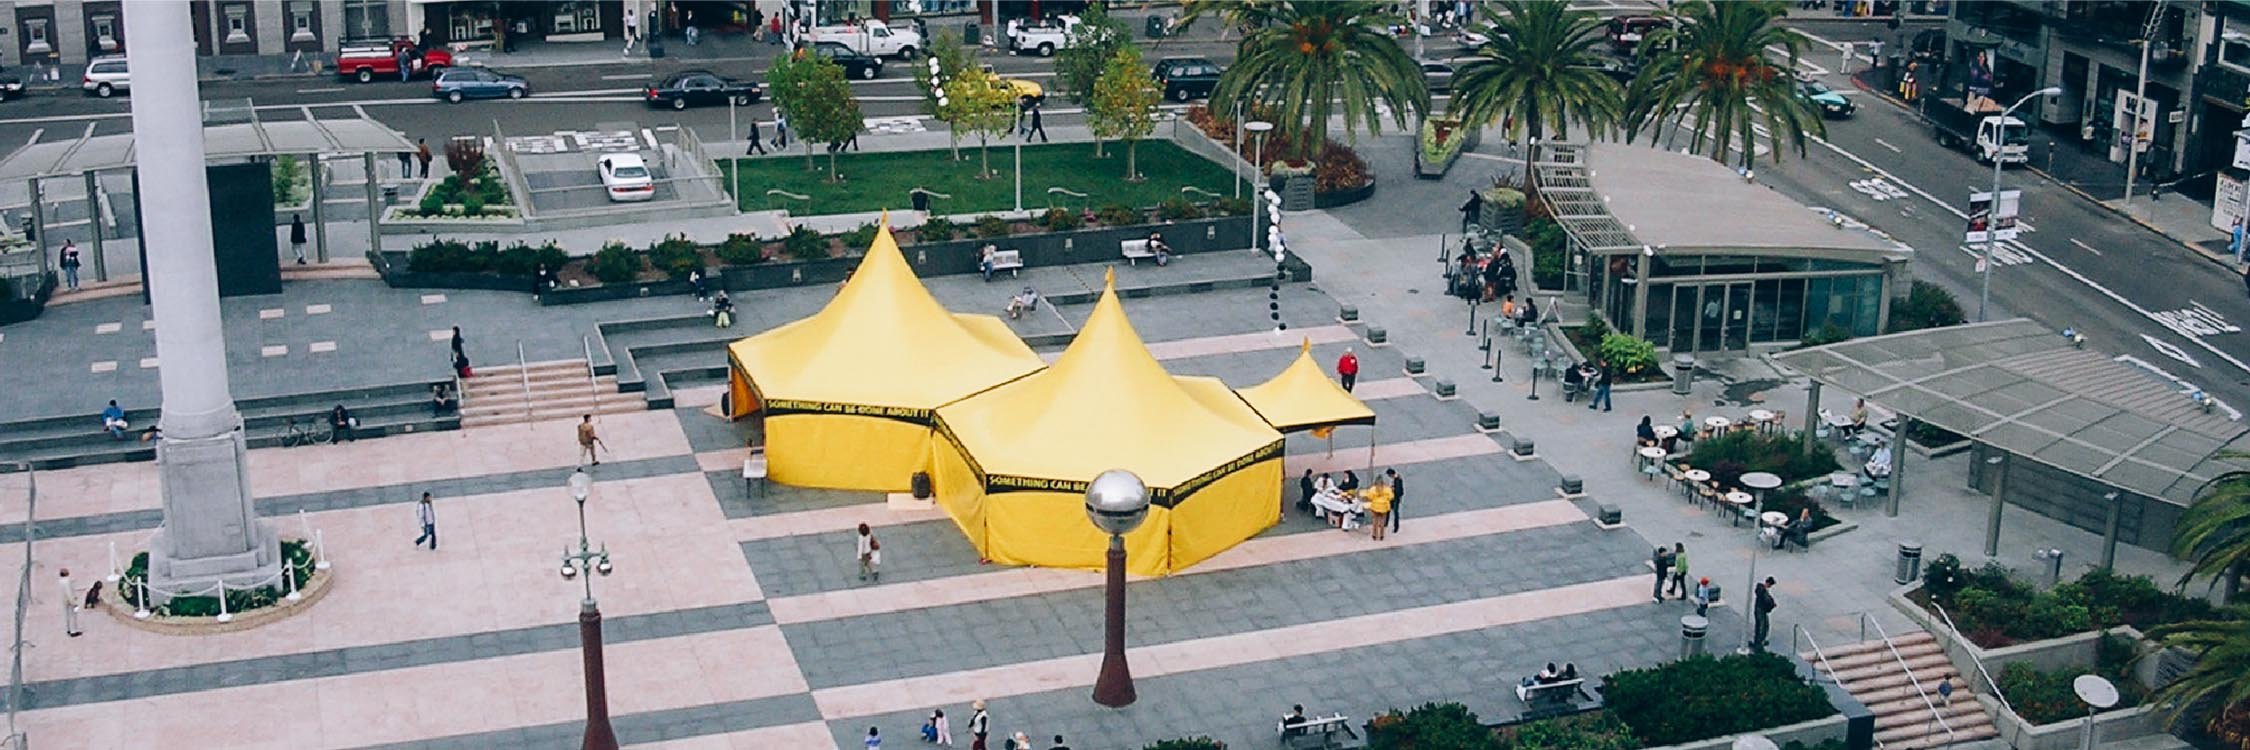 octagonal-scientology-tents-installed-in-union-square-park-in-san-francisco